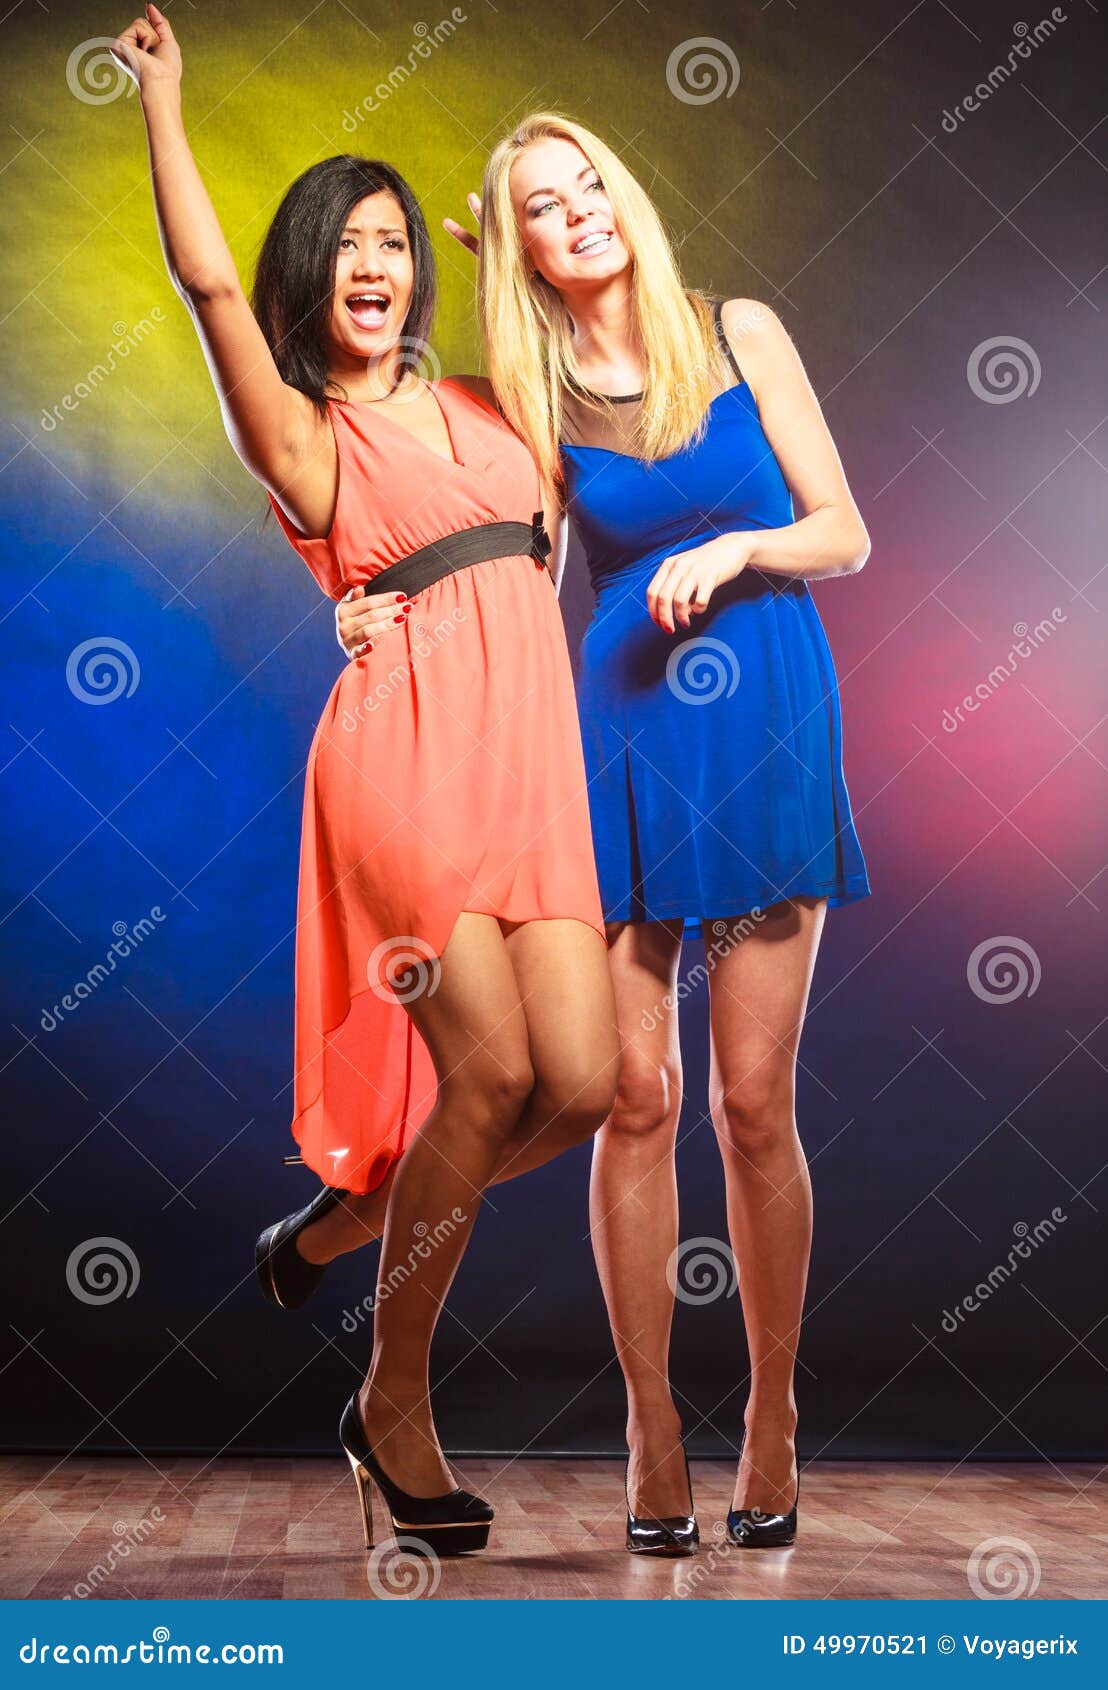 Two Funny Women in Dresses. Stock Image - Image of female, dancing: 49970521